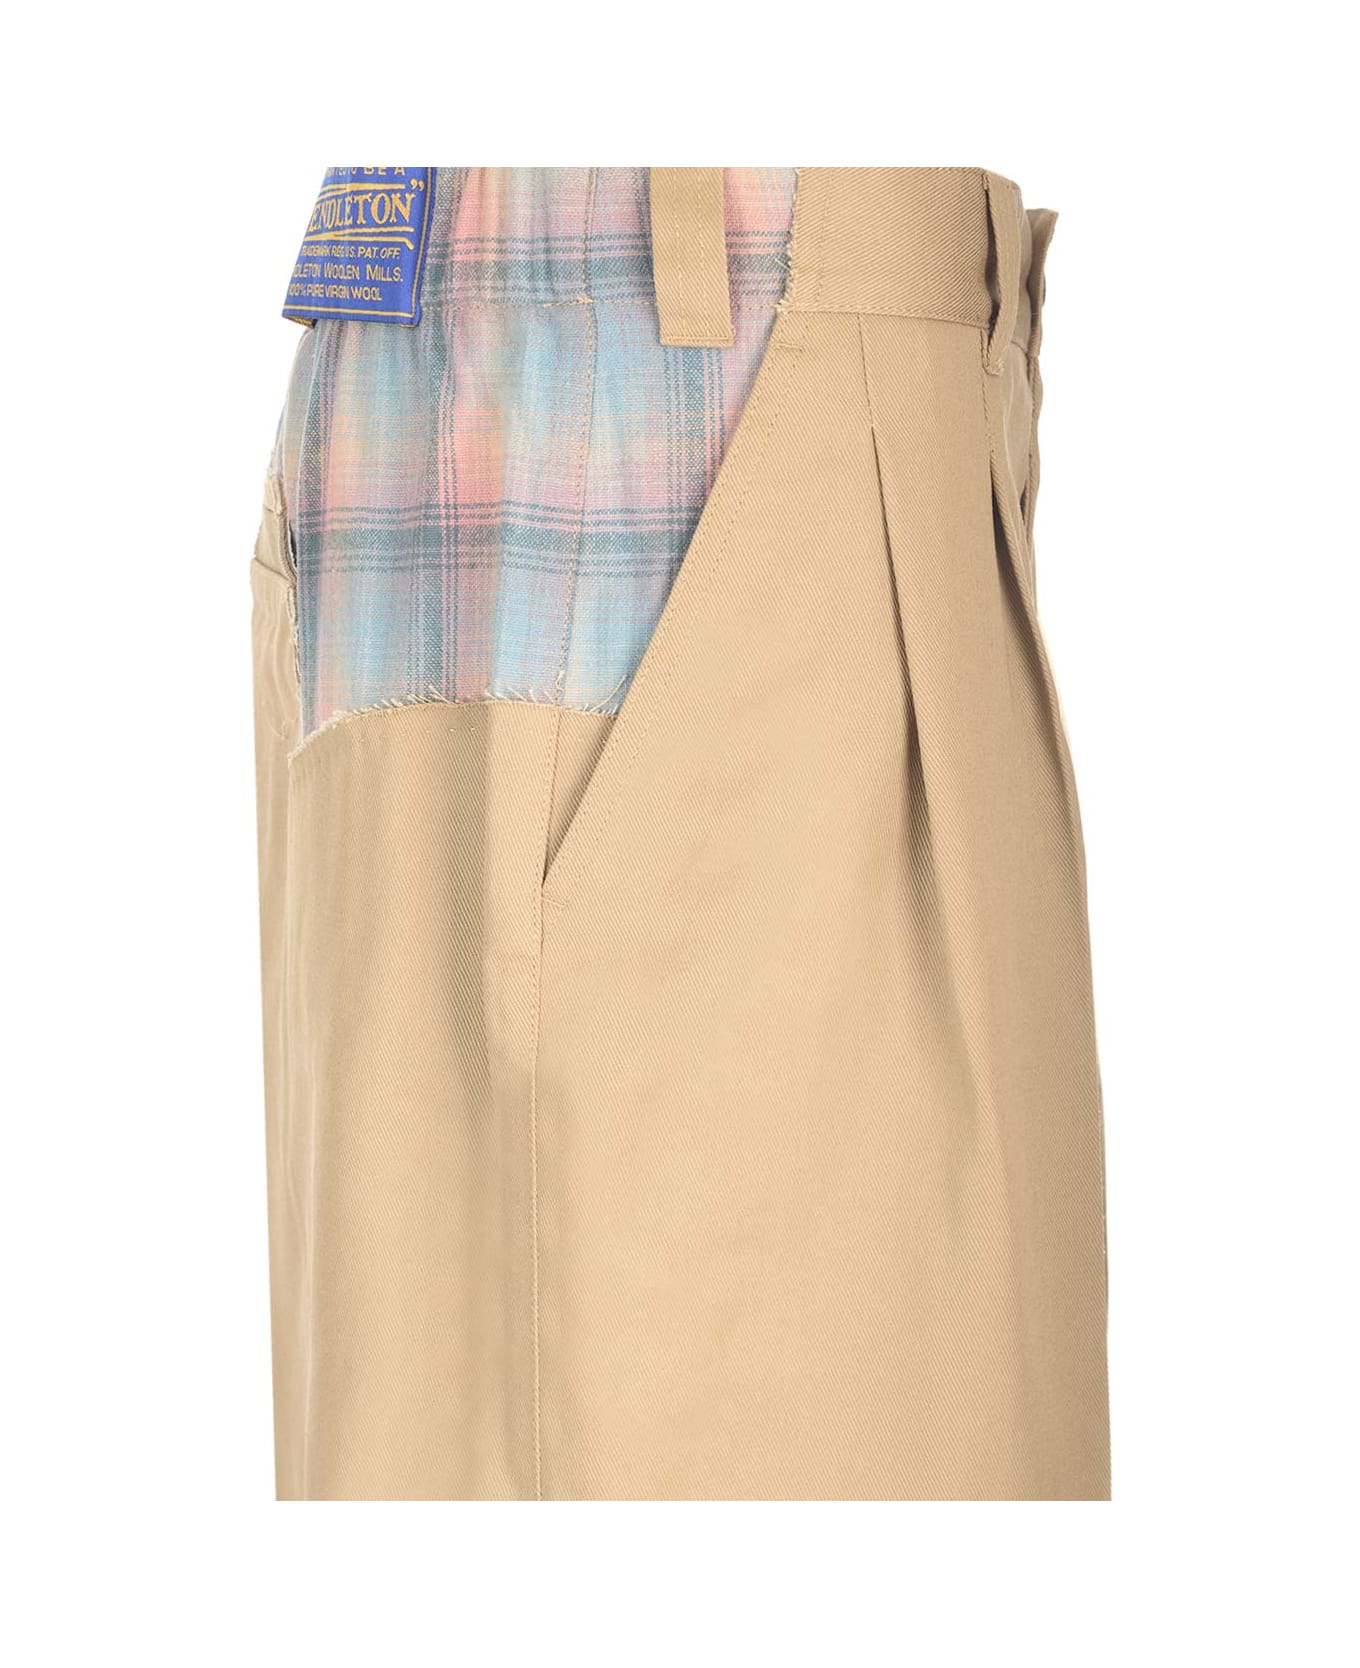 Maison Margiela Trousers With Checked Wool Insert - Beige